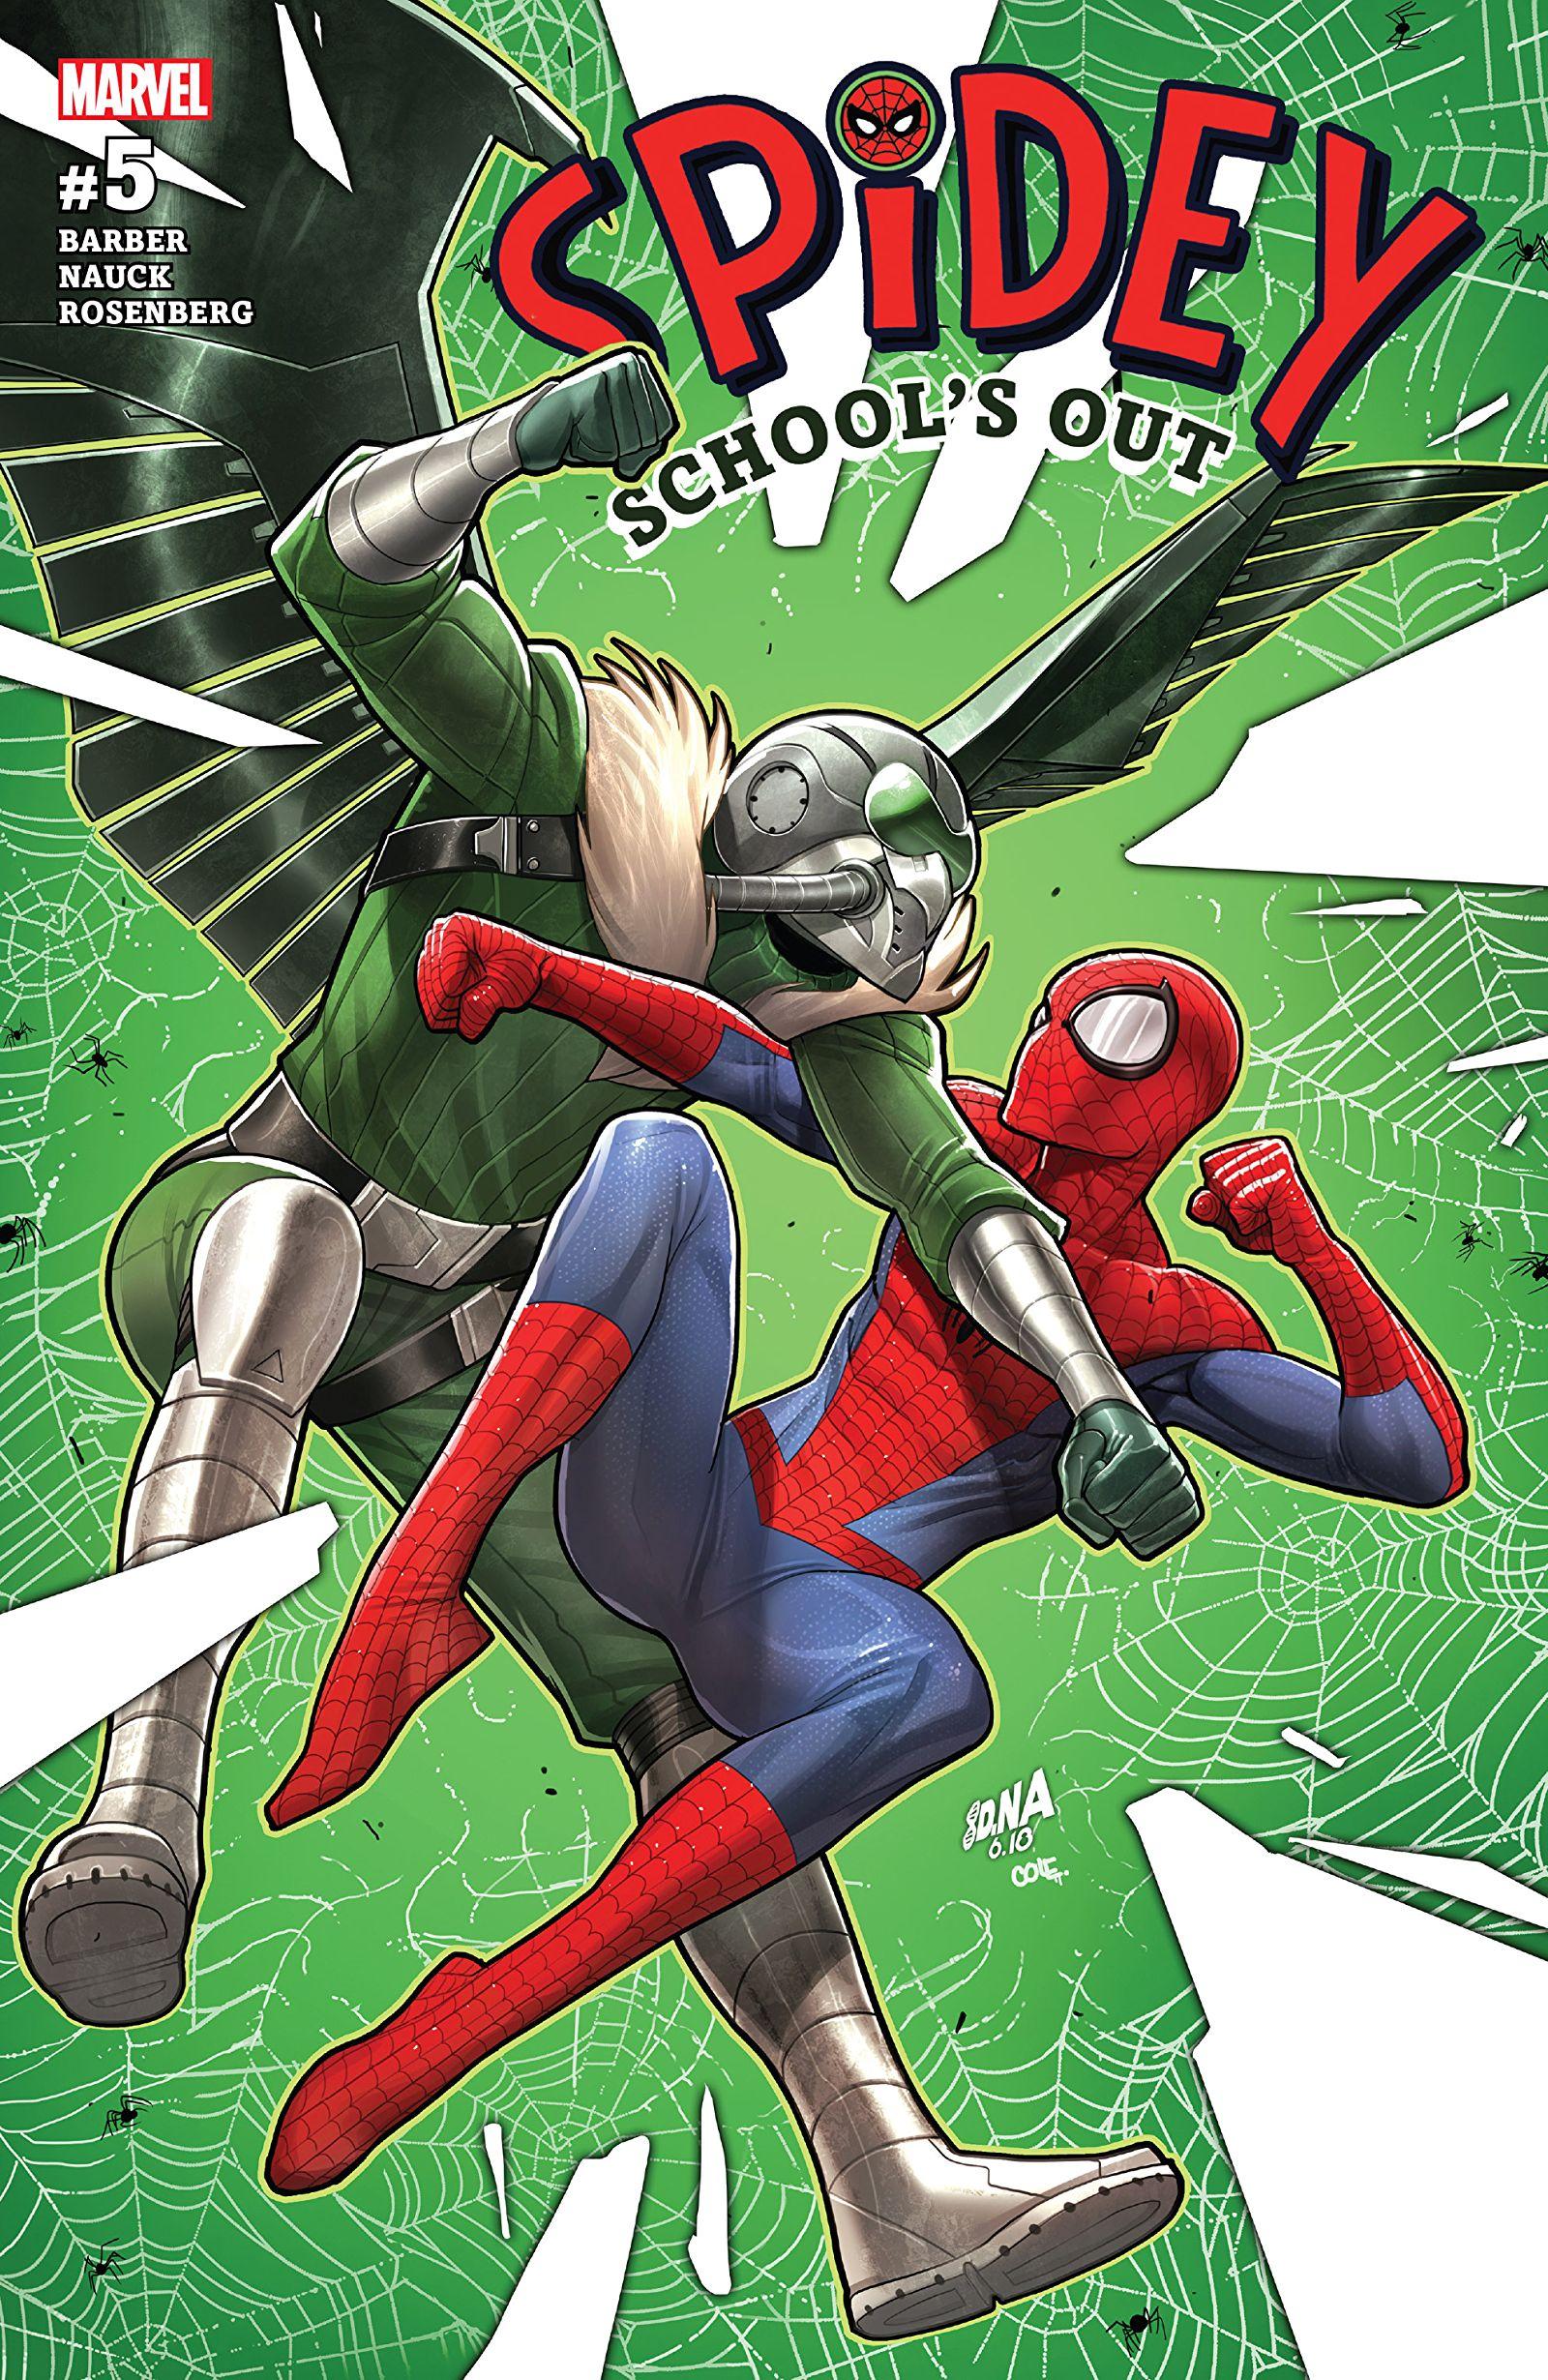 Spidey: School's Out Vol. 1 #5